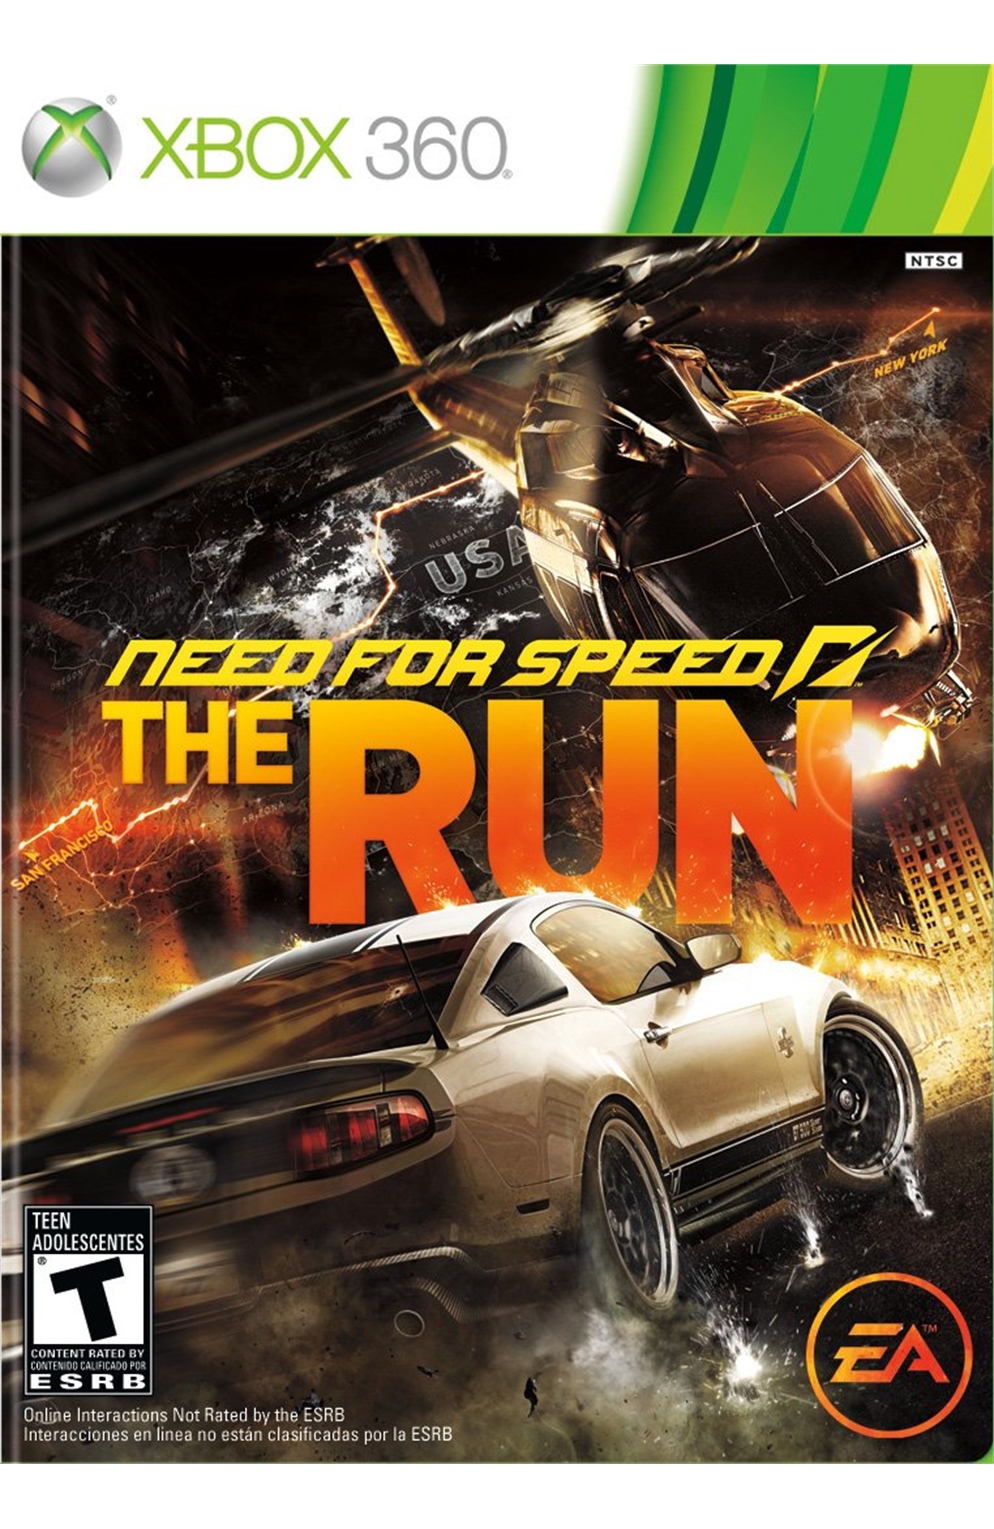 Xbox 360 Xb360 Need For Speed: The Run